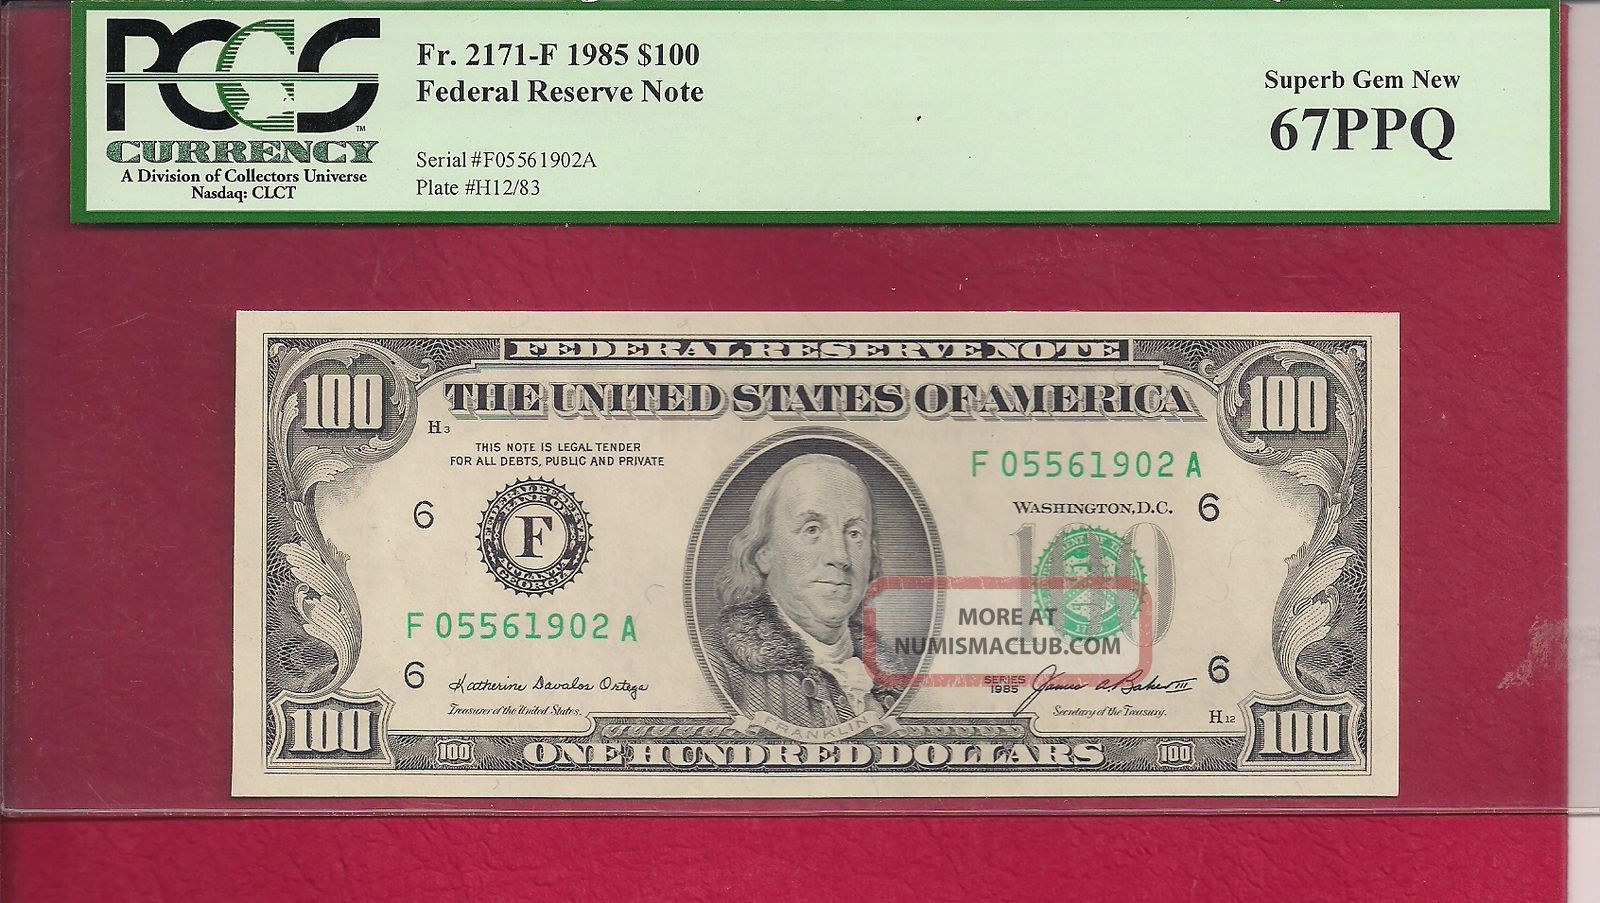 federal reserve note 100 banknote coin